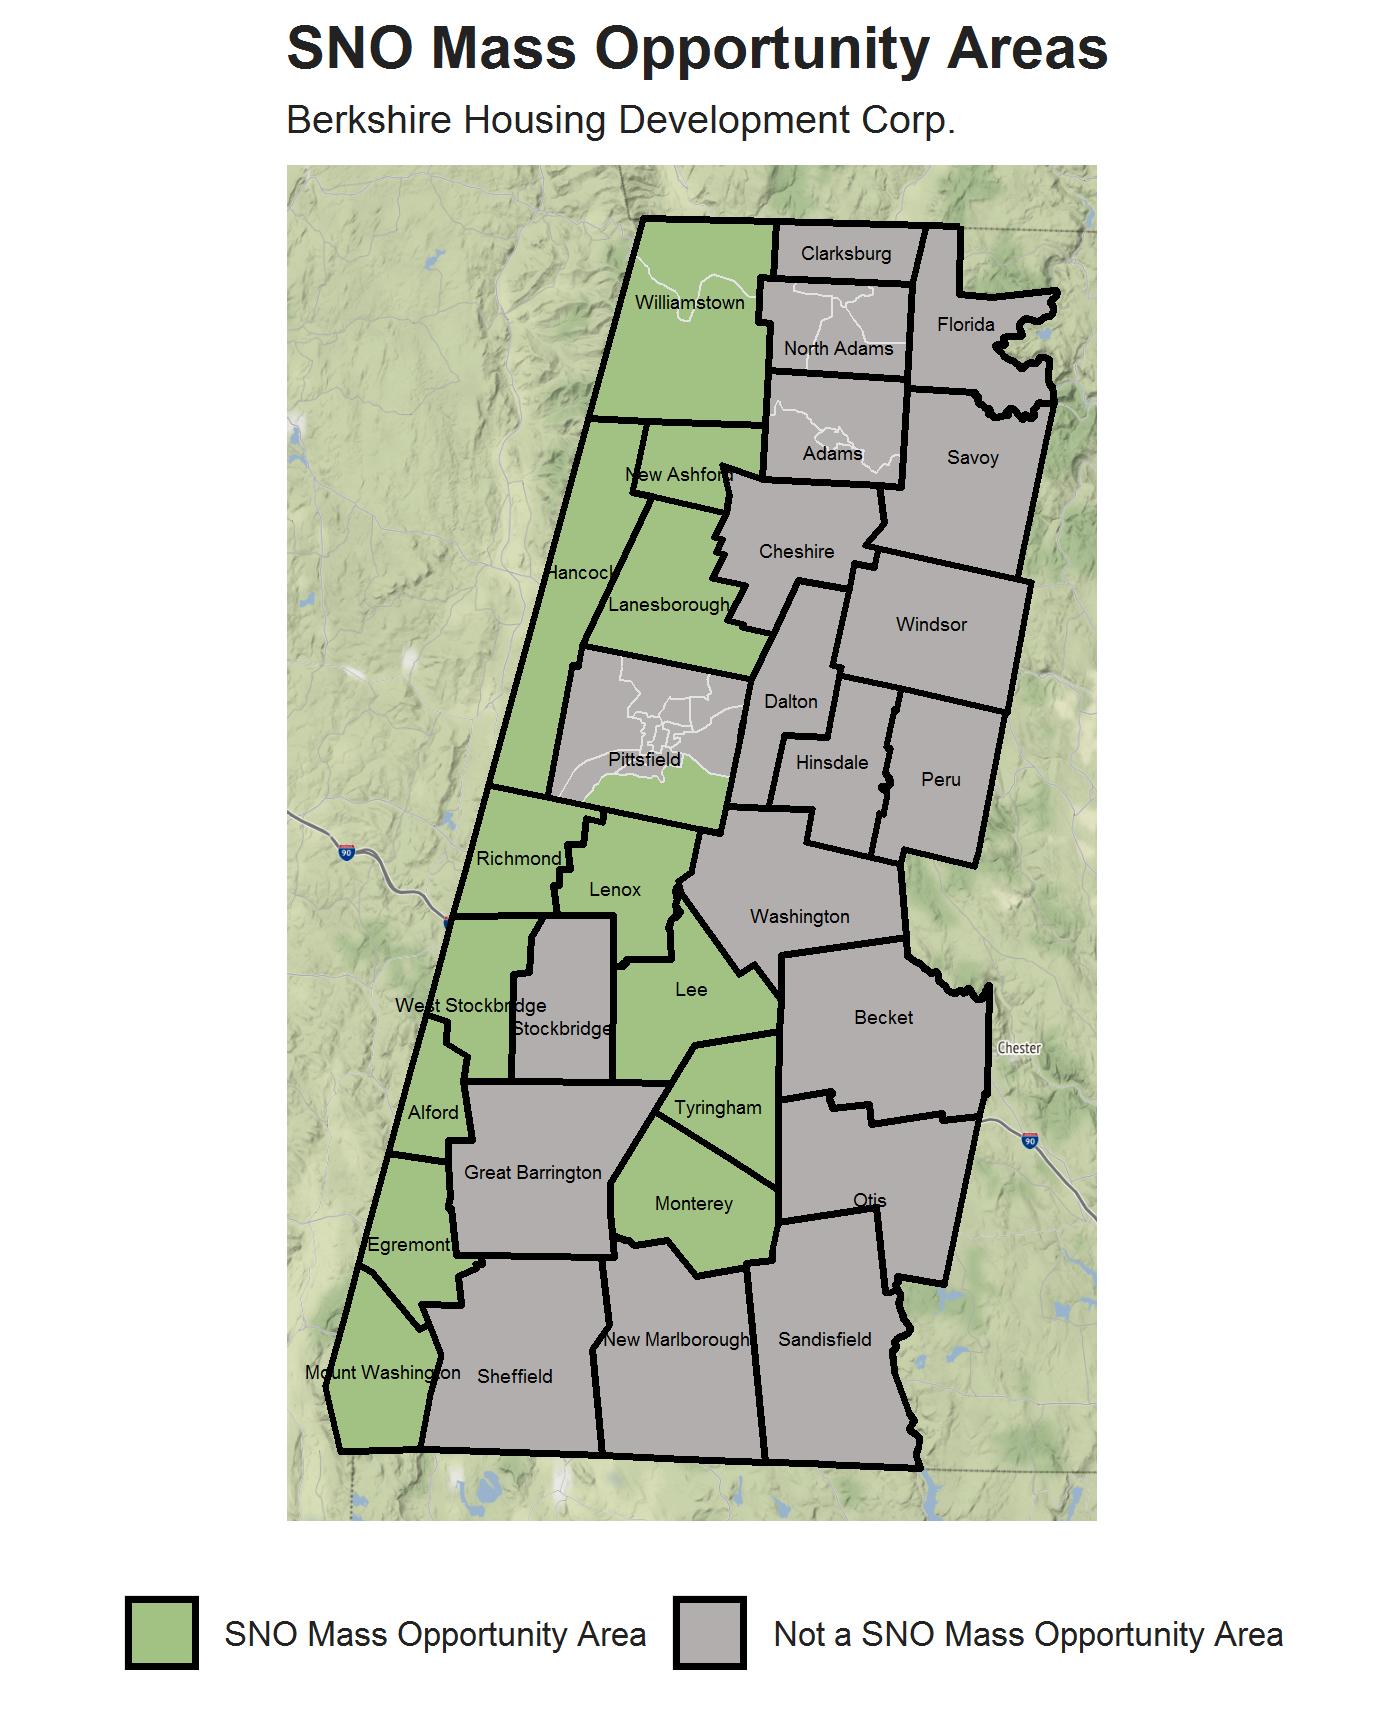 SNO Mass Berkshire County Map that highlights opportunity areas within the region